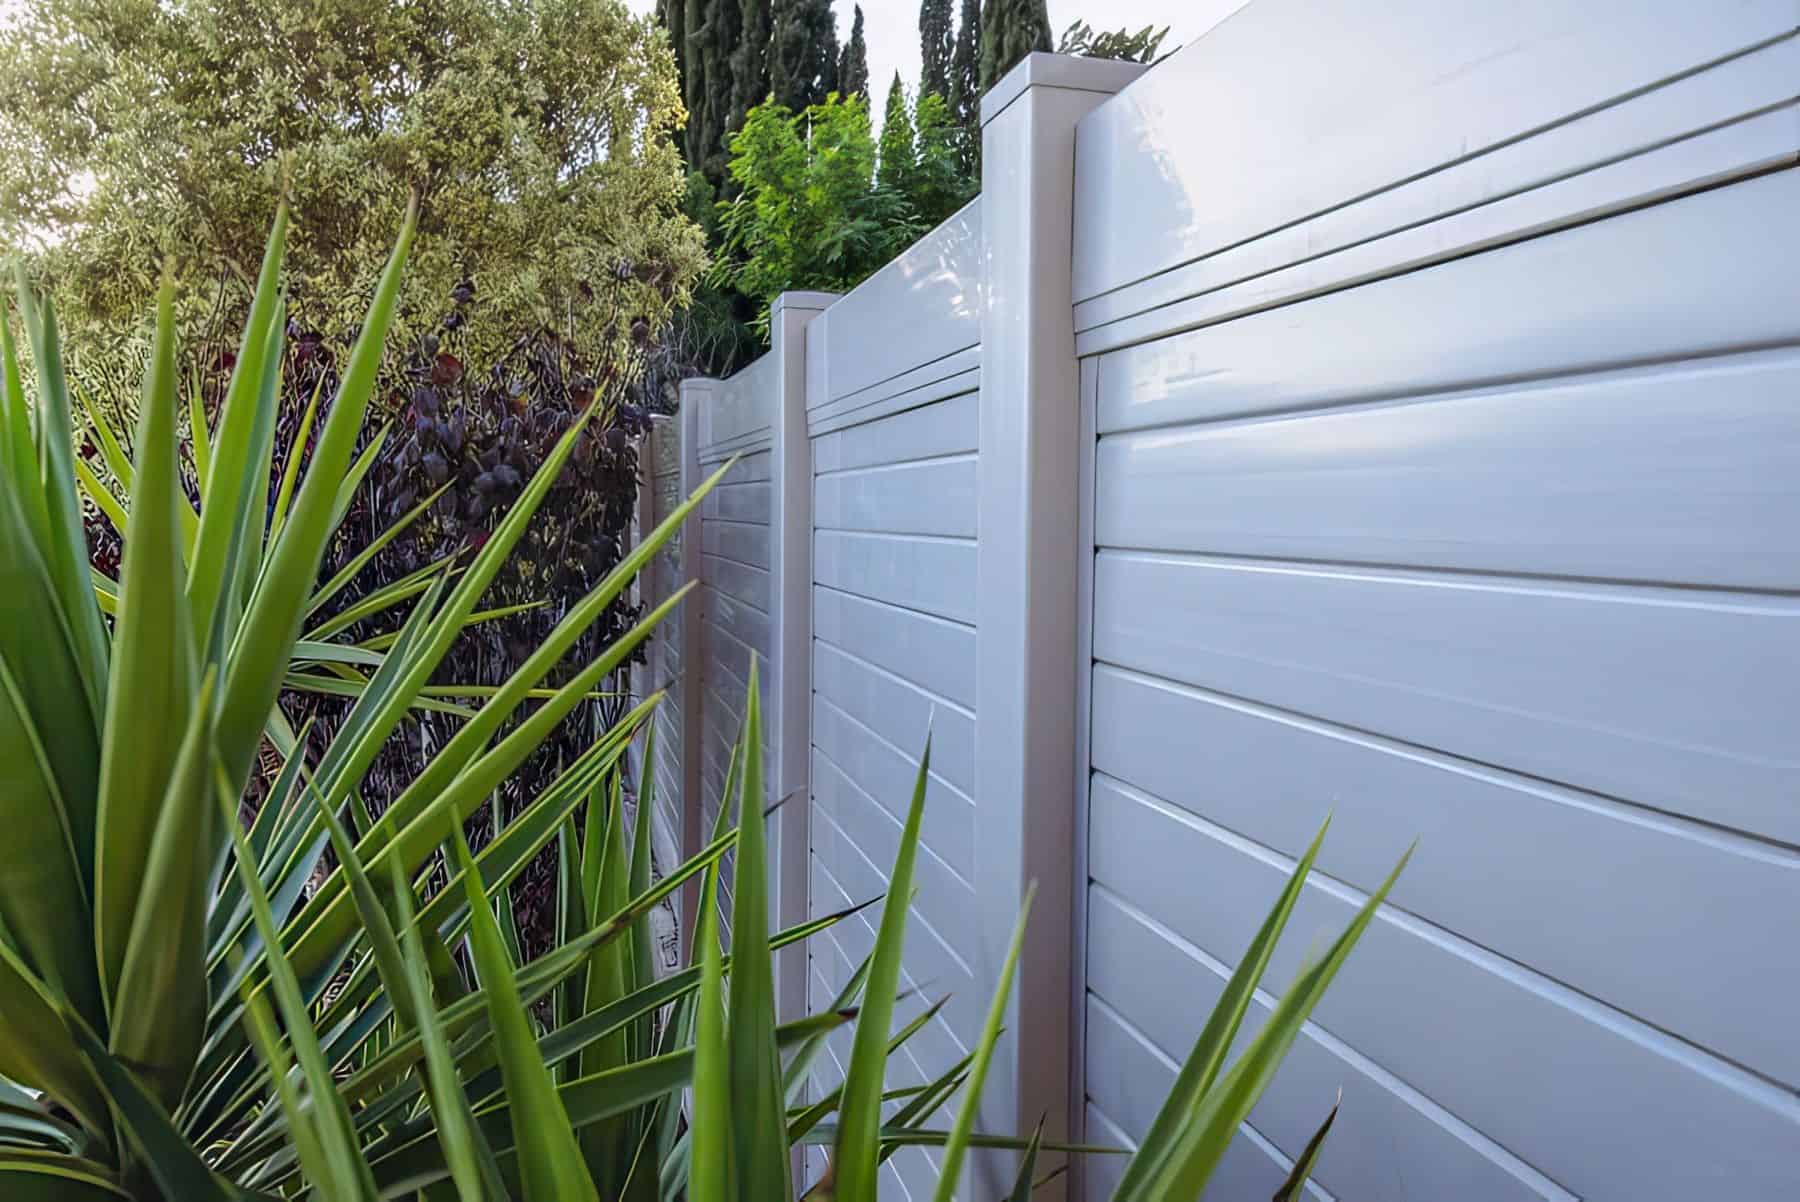 Matte vinyl privacy horizontal fence bordering the backyard, behind small trees and plants of garden patch.